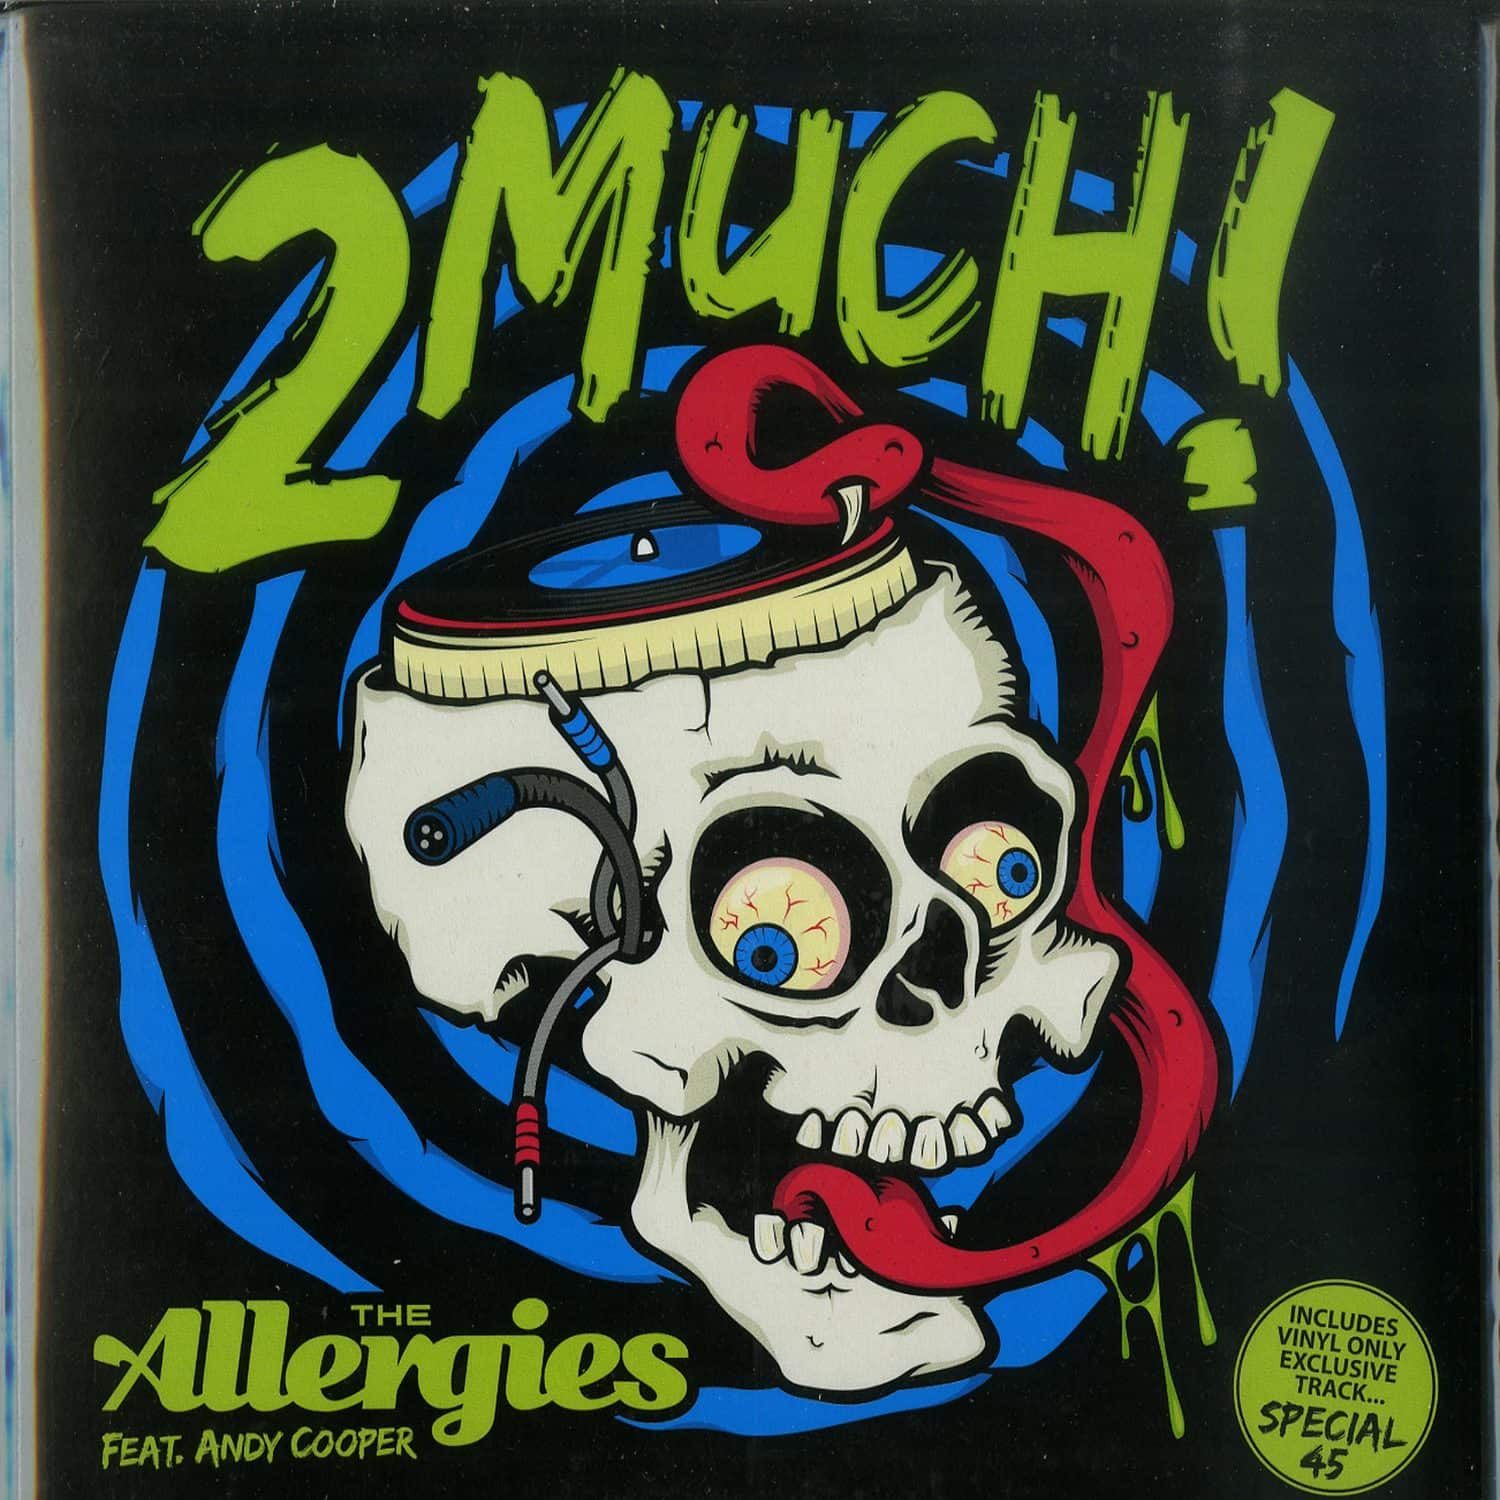 The Allergies - 2 MUCH! / SPECIAL 45 